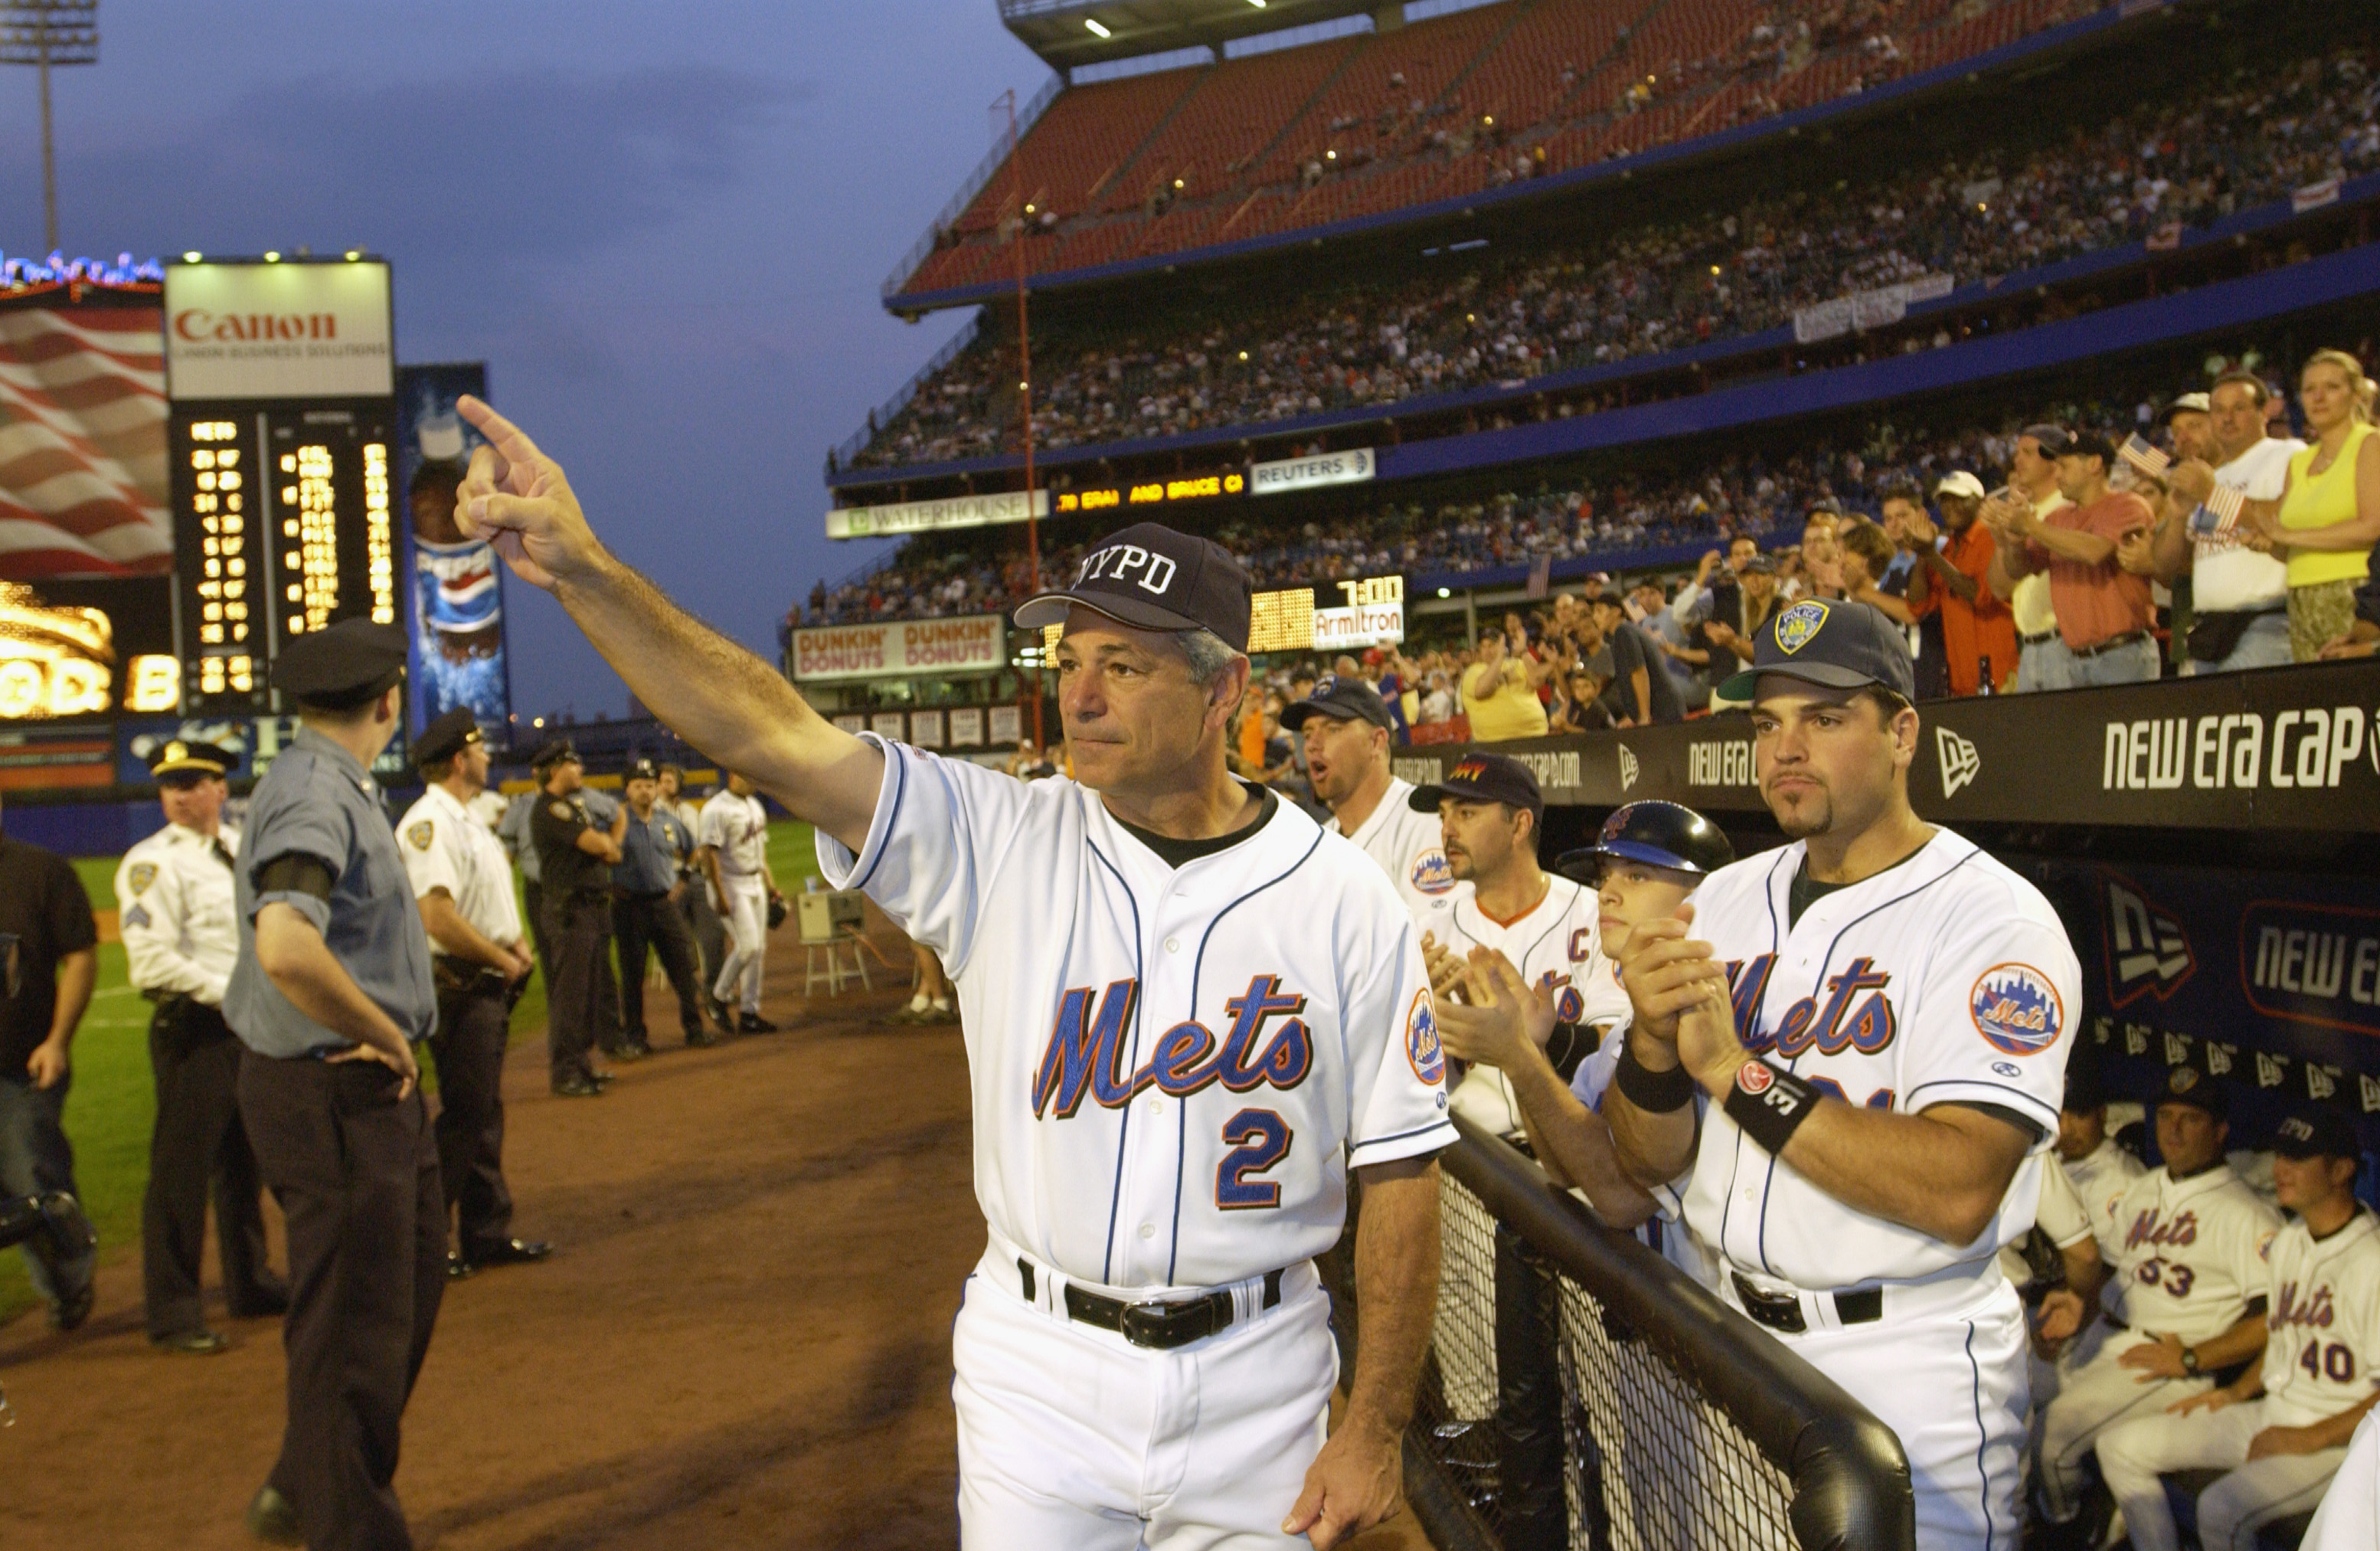 Manager Bobby Valentine and catcher Mike Piazza of the New York Mets applaud before the Mets game against the Atlanta Braves on September 21, 2001 at Shea Stadium in Flushing, New York.